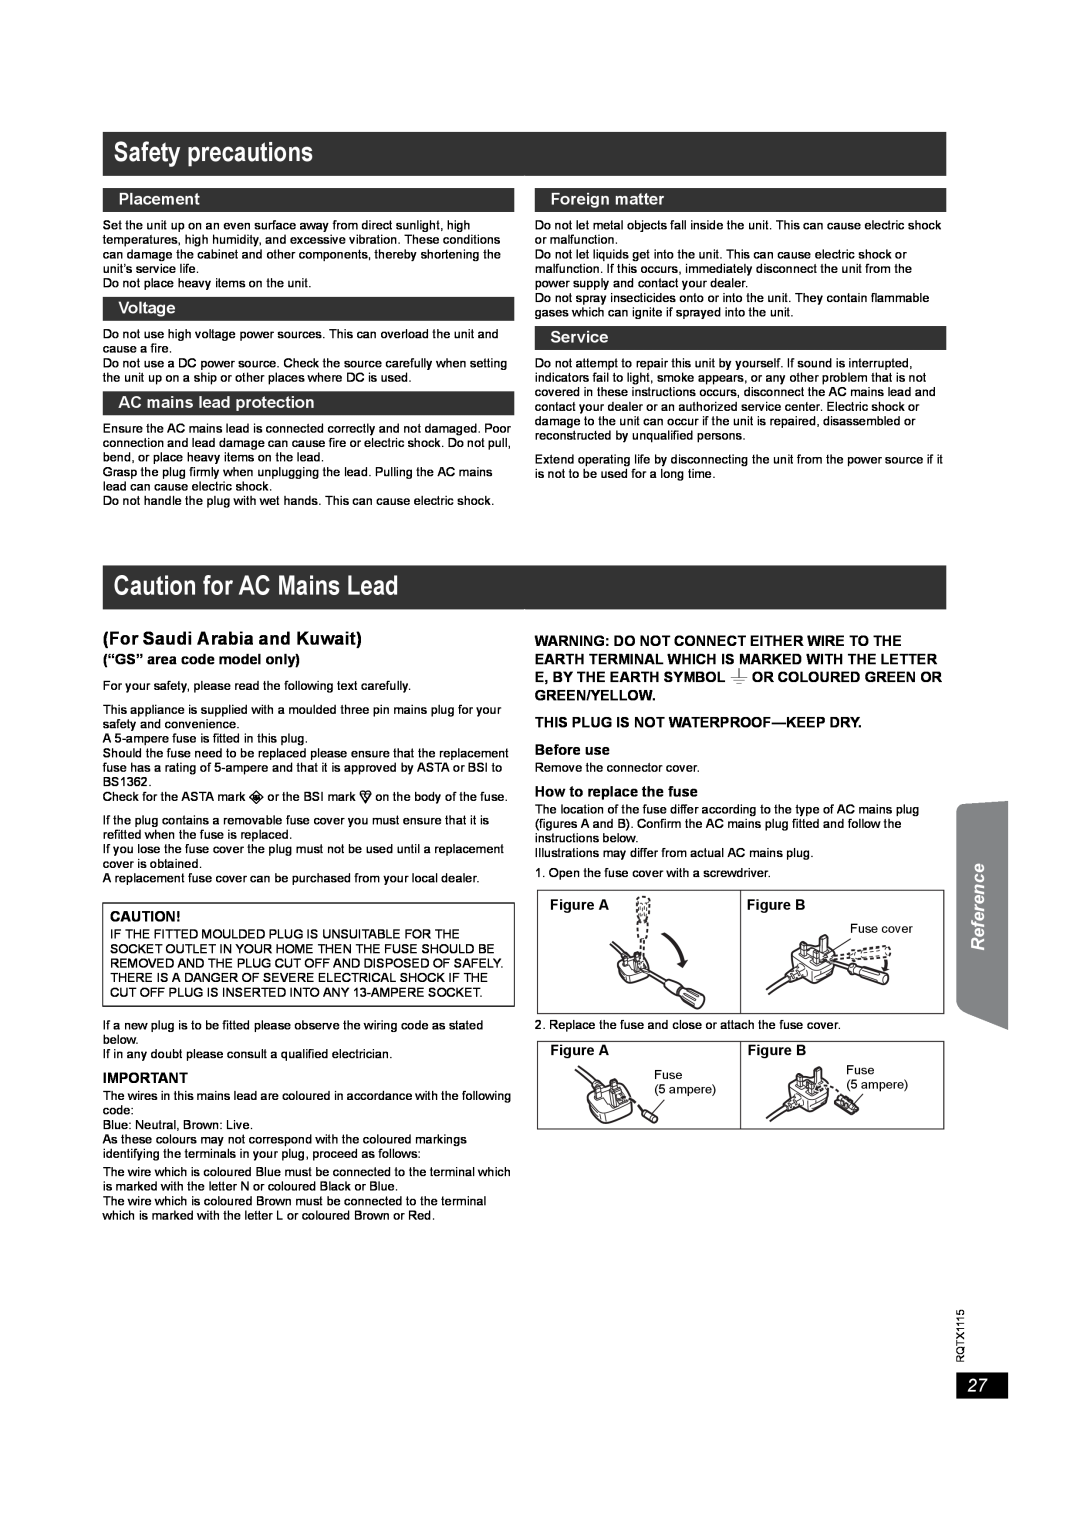 Panasonic SC-PT980 manual Safety precautions, Caution for AC Mains Lead, Getting Started Playing Discs, Operations, Other 